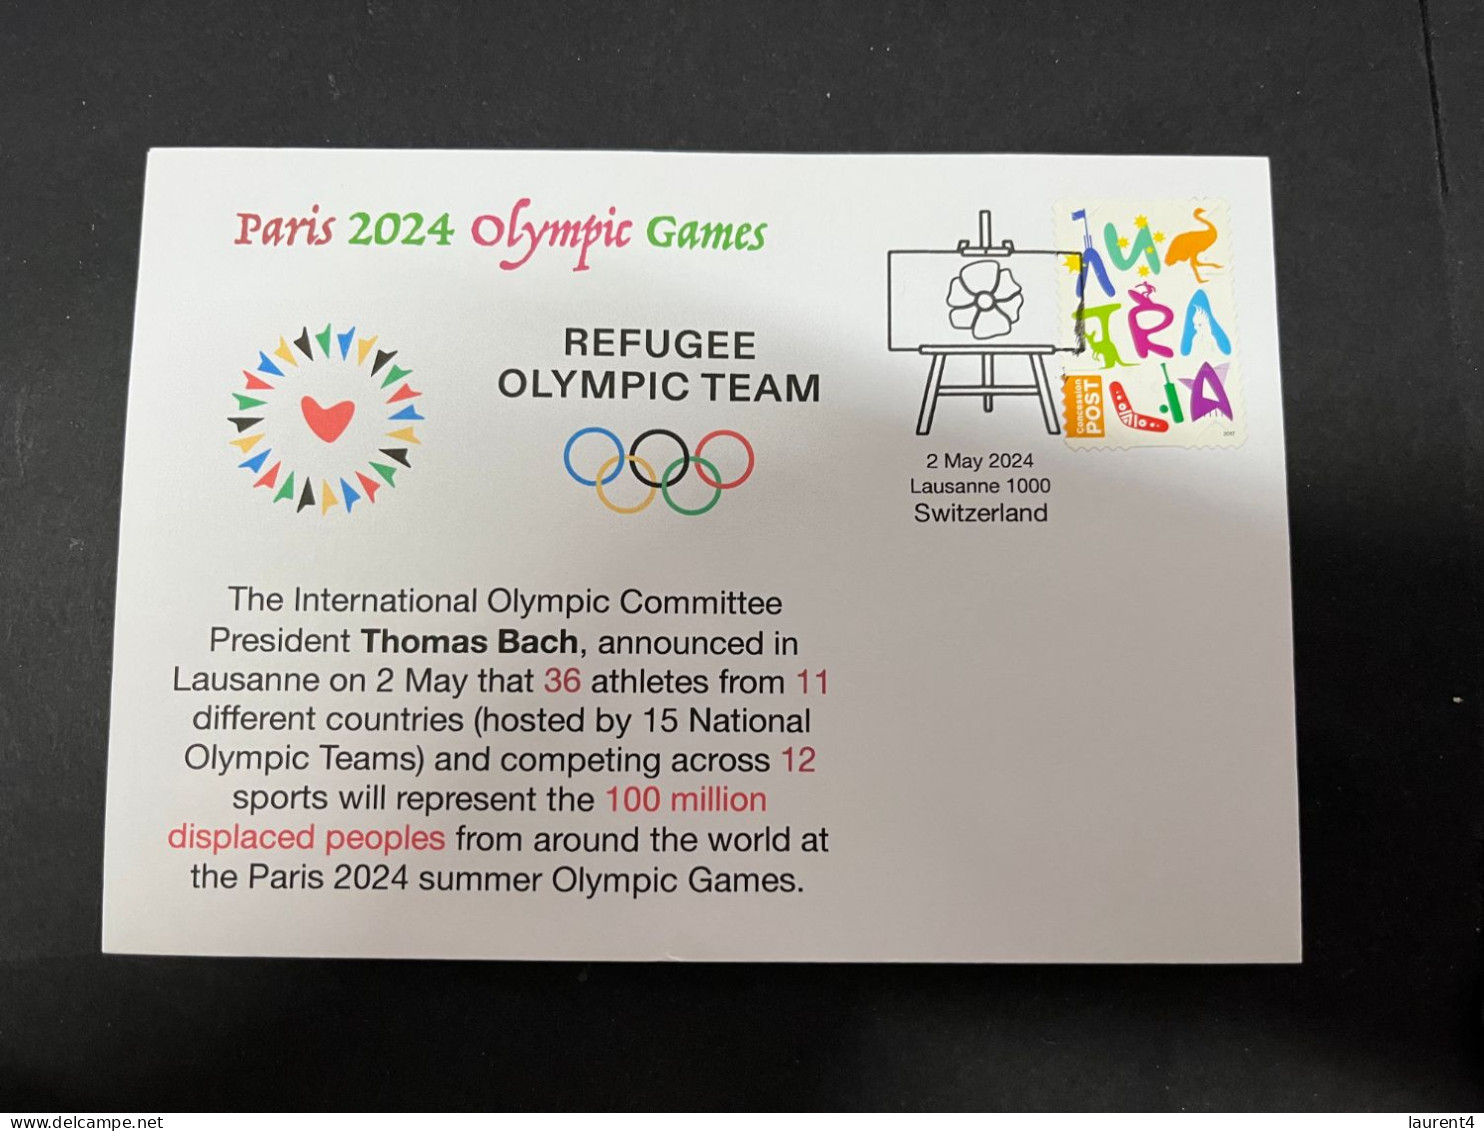 5-5-2024 (4 Z 12 A) Paris Olympic Games 2024 - Refugee Olympic Team (36 Athletes) - Summer 2024: Paris